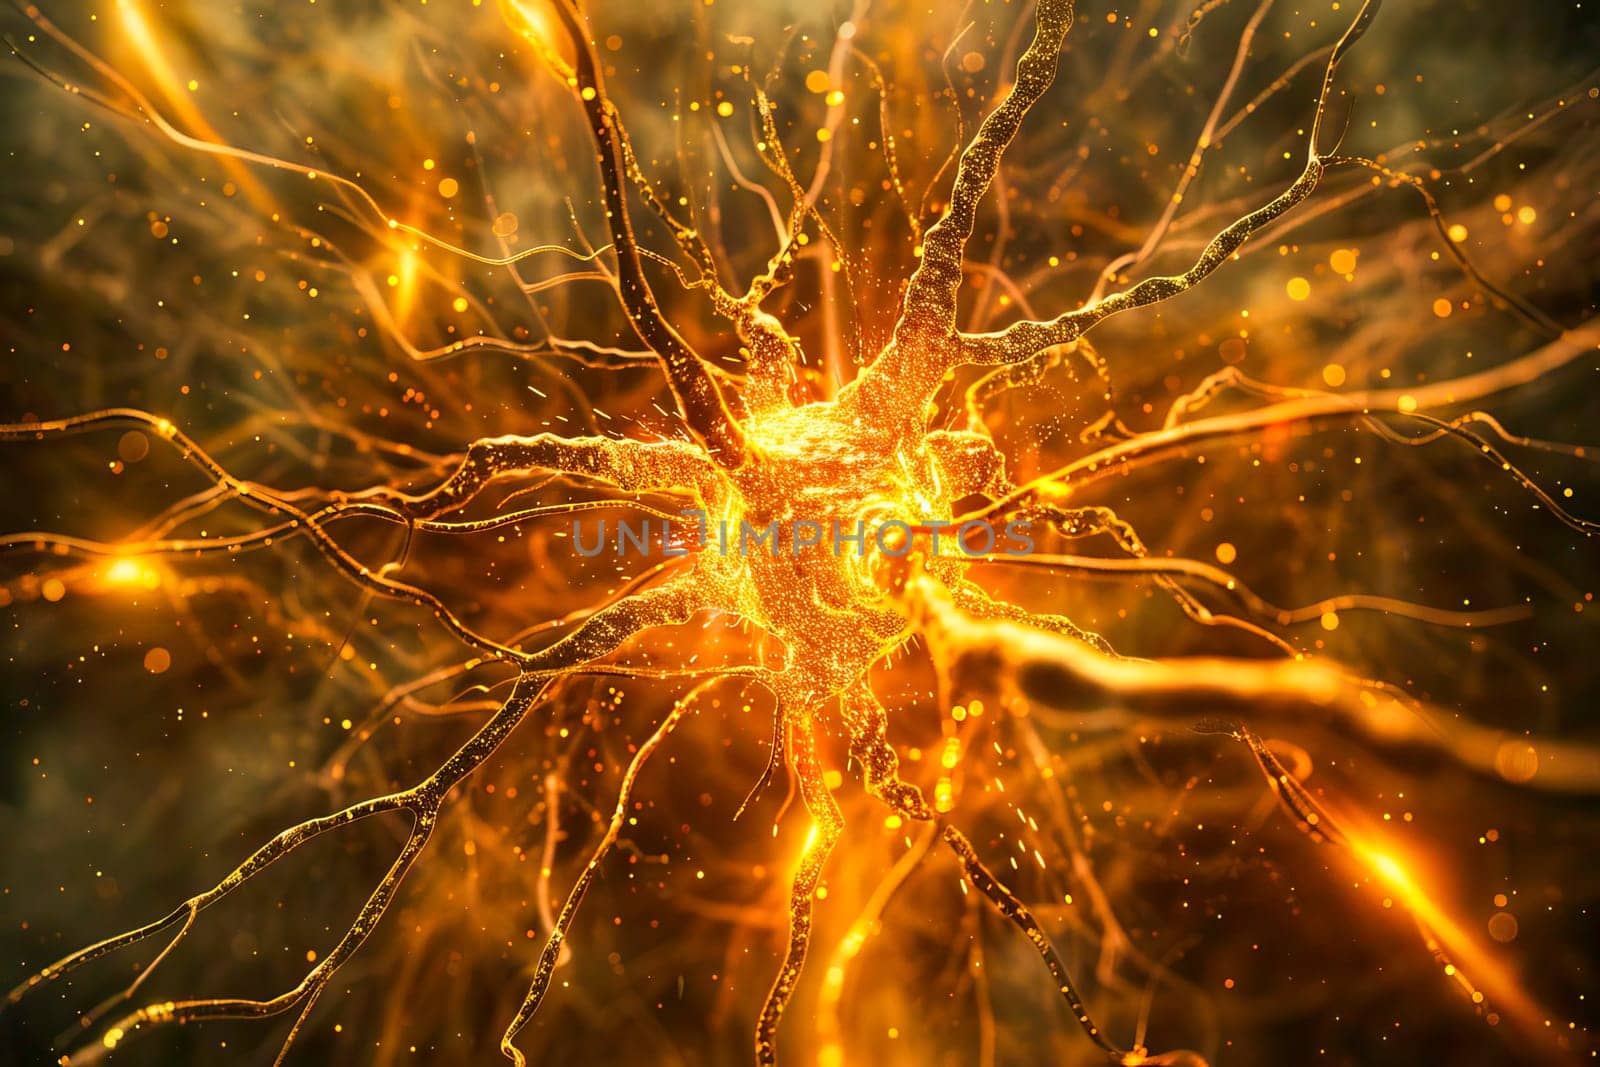 Neurons in the brain firing, highlighted by a burst of light.